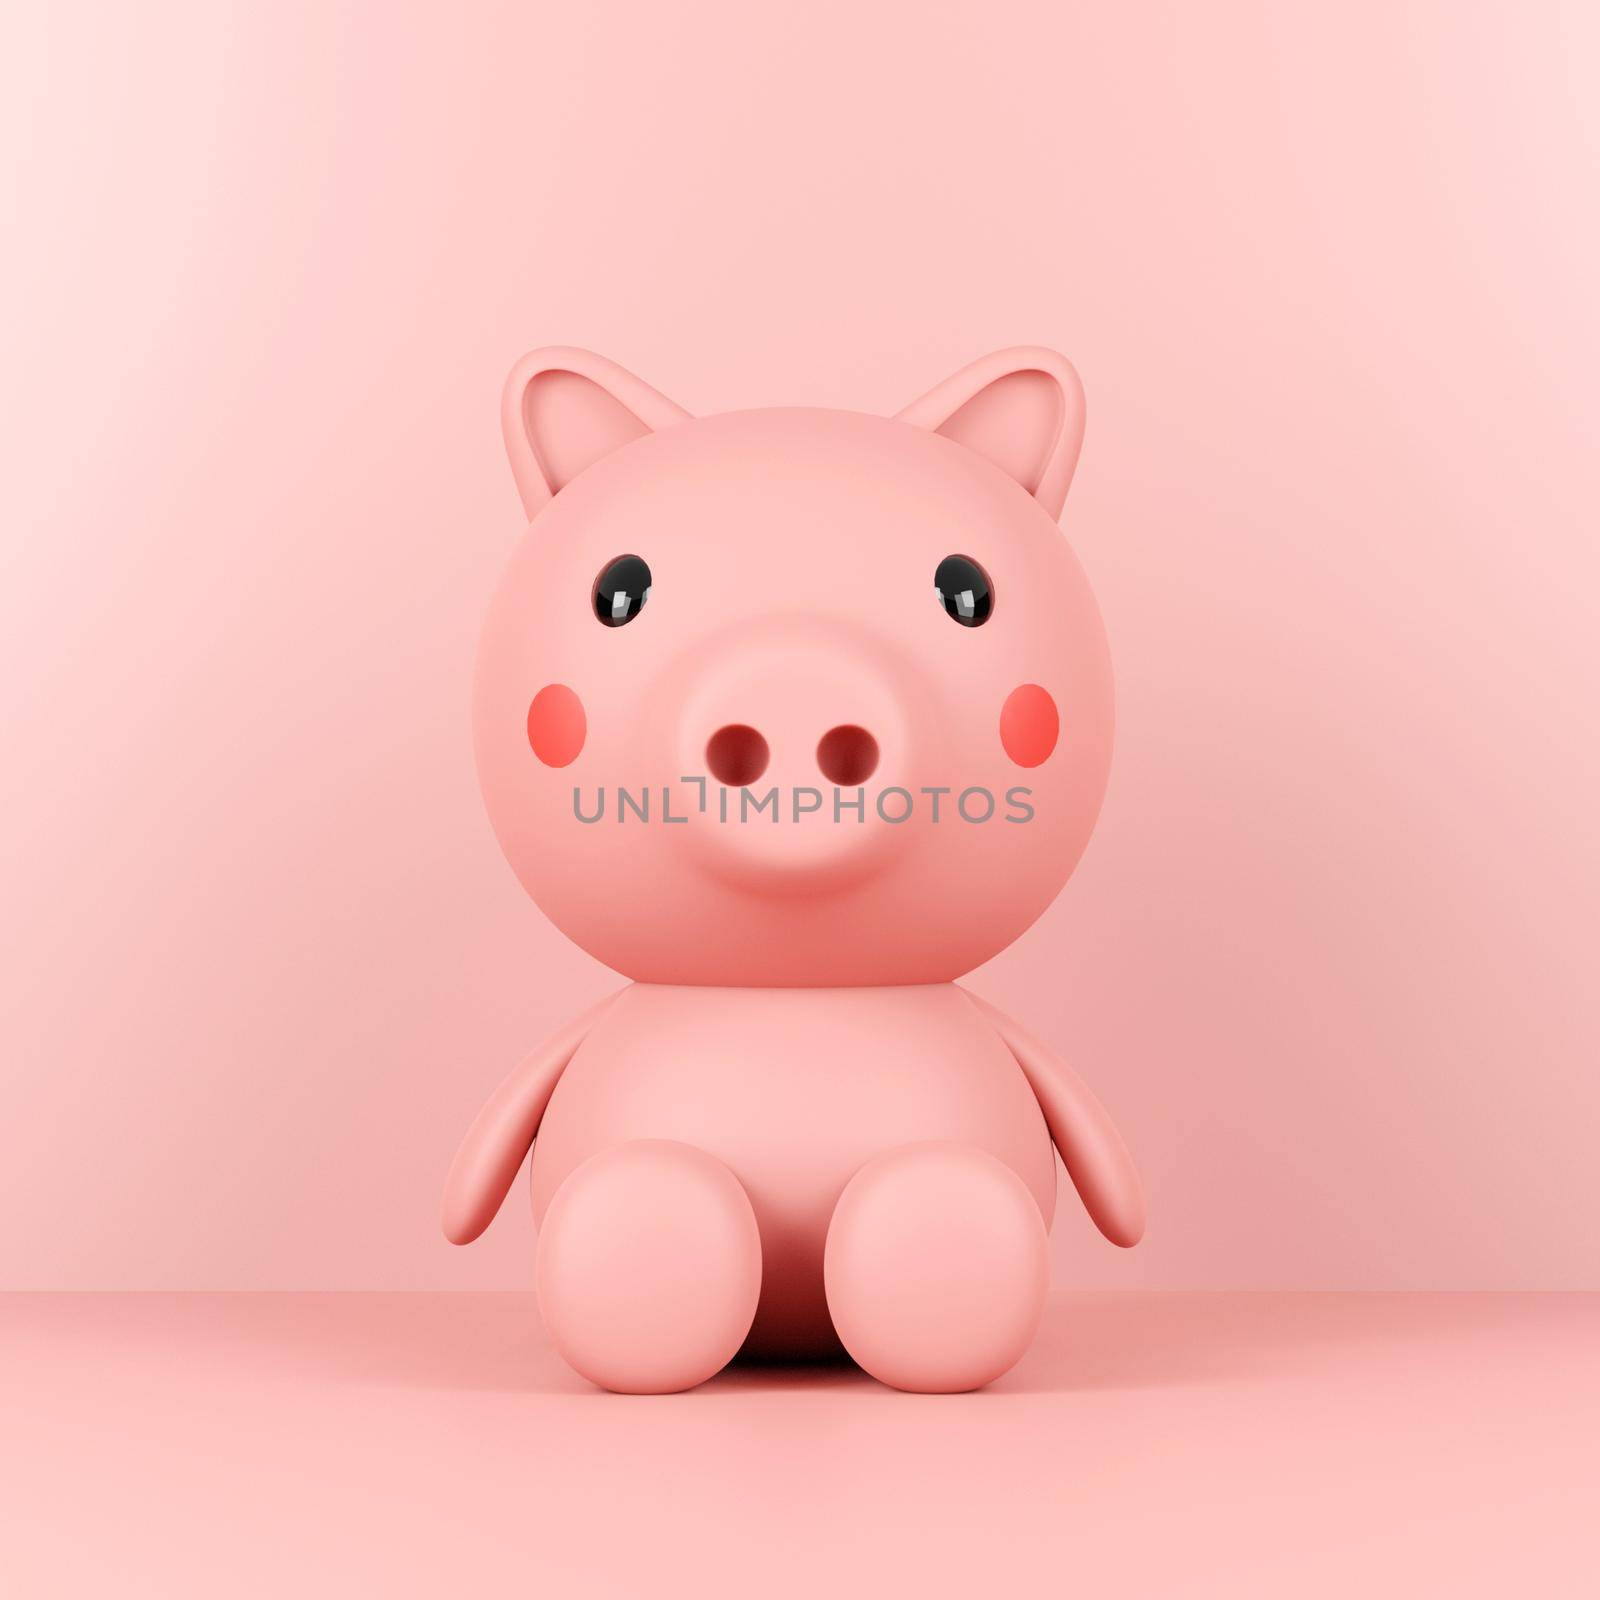 Cute pig cartoon character on a pink background, 3d rendering